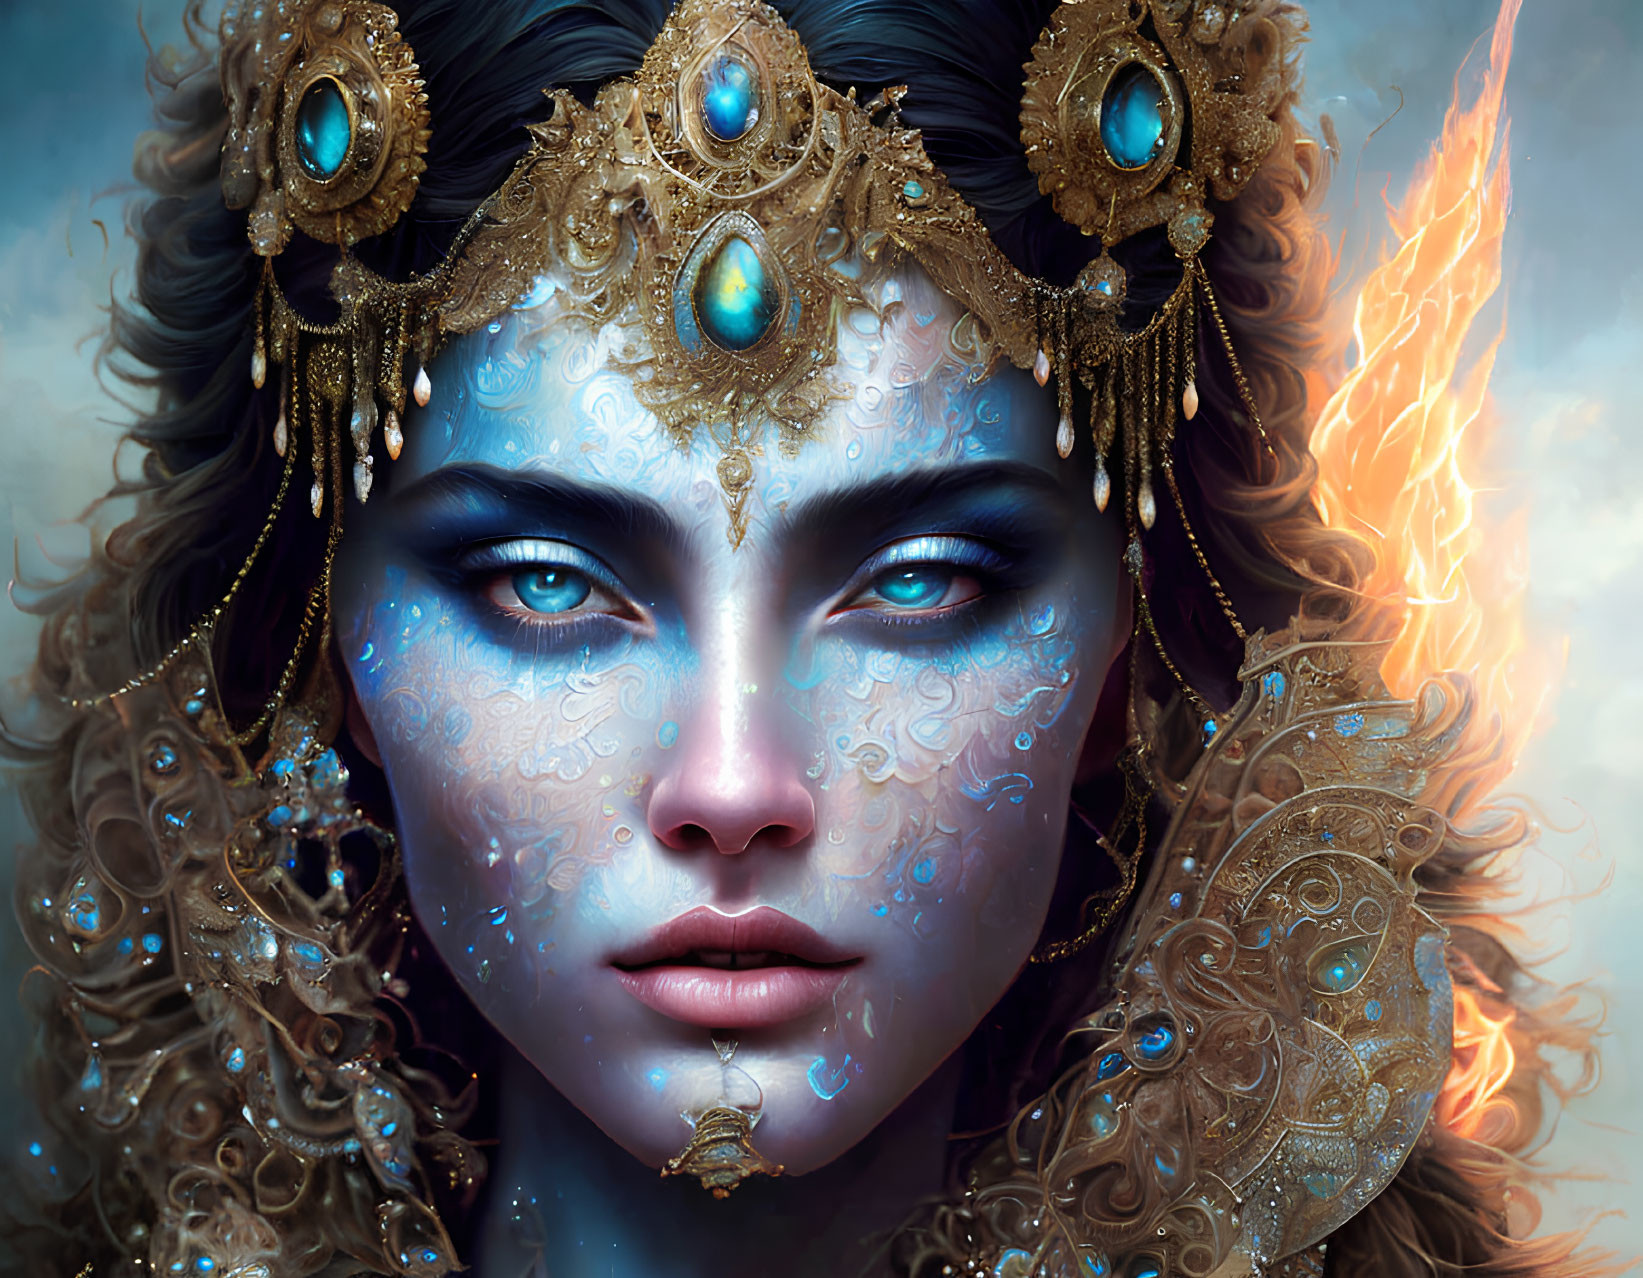  A woman with blue skin and golden jewelry looks at the viewer with her head tilted to one side. She has a thoughtful expression on her face and is considering the impact of speaking to jinn on psychological wellbeing.